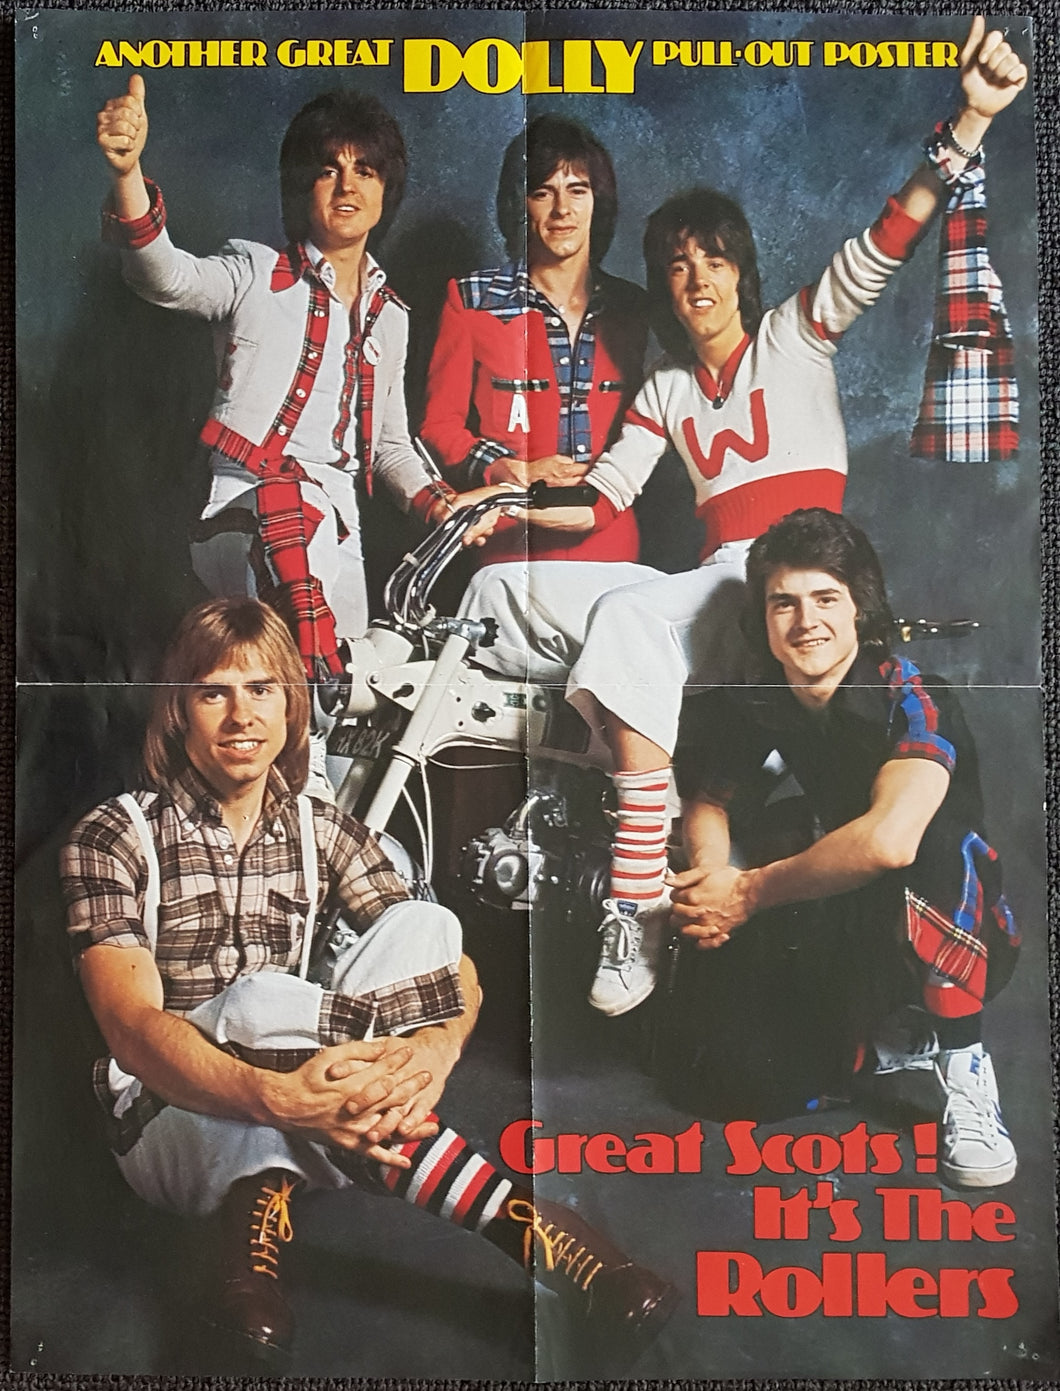 Bay City Rollers - Another Great Dolly Pull-Out Poster